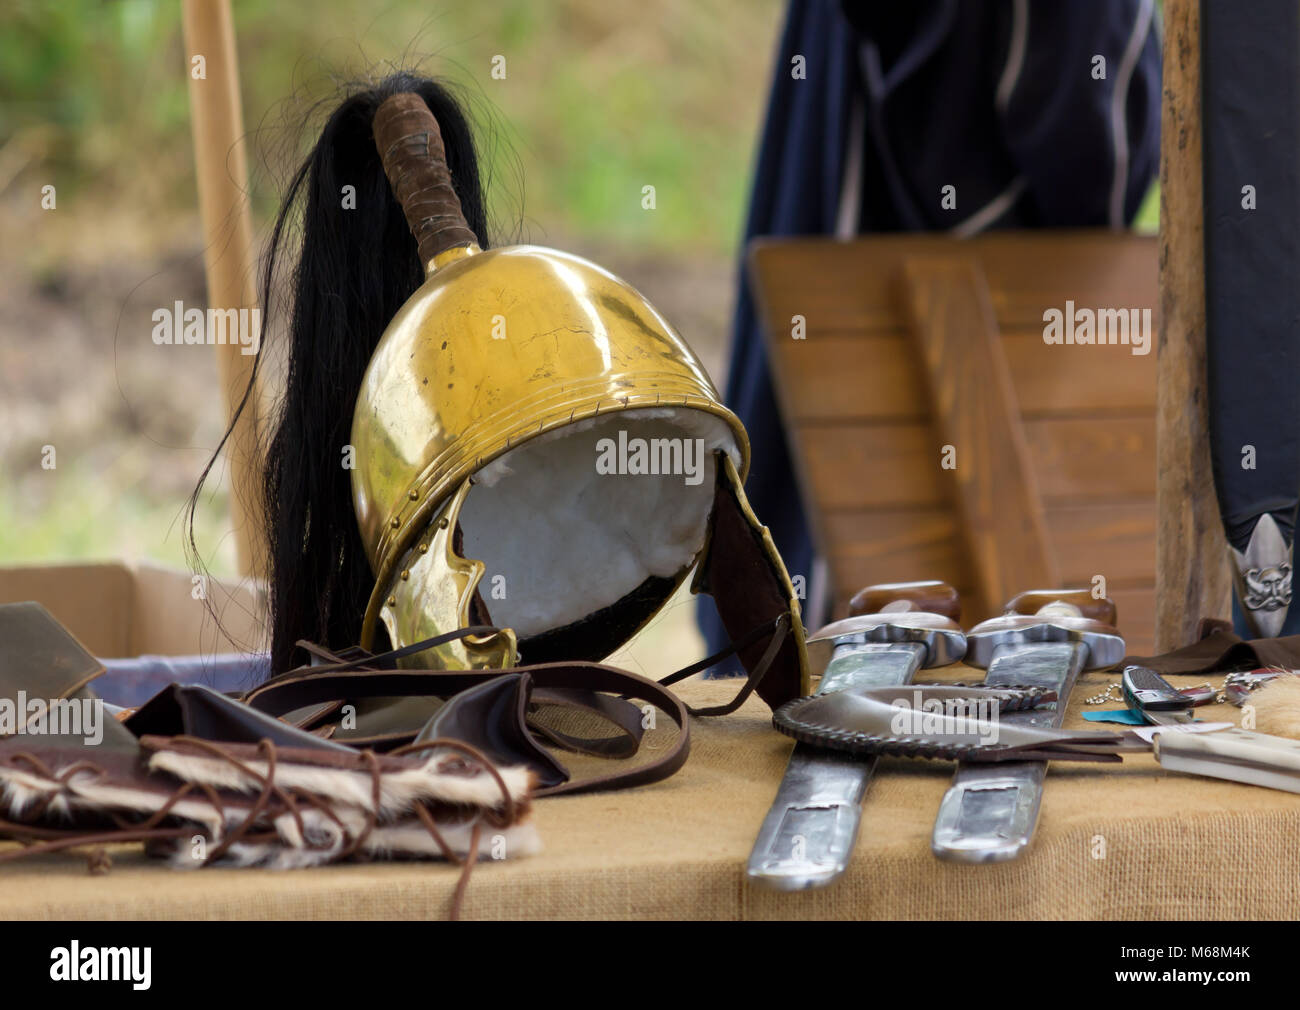 Ancient Roman helmet on a table together with other war equipment Stock Photo